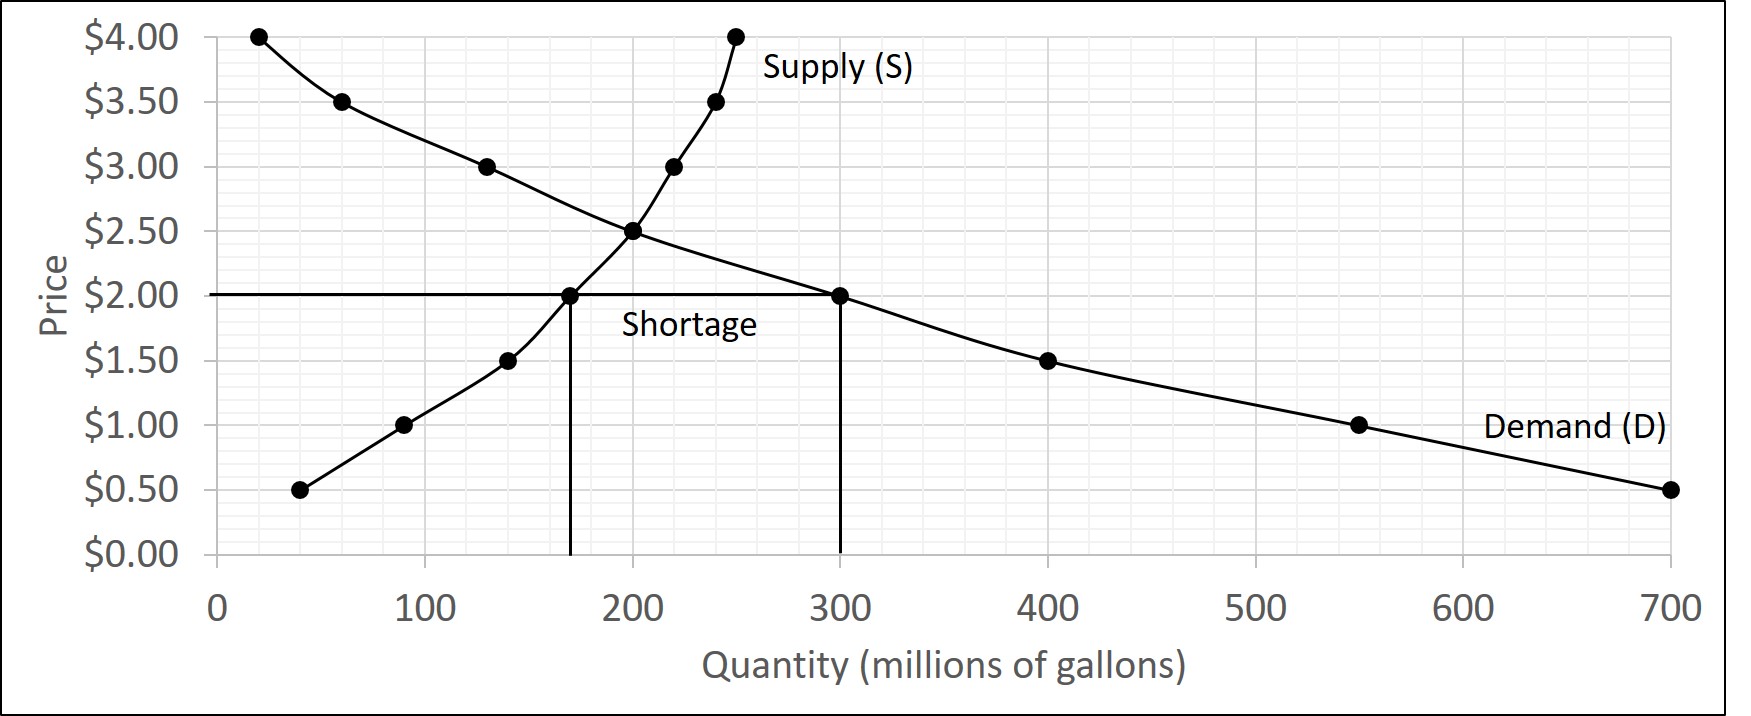 The graph has a supply and demand curve but the market price is set below the equilibrium price. This causes the quantity demanded to be greater than the quantity supplied creating a shortage.